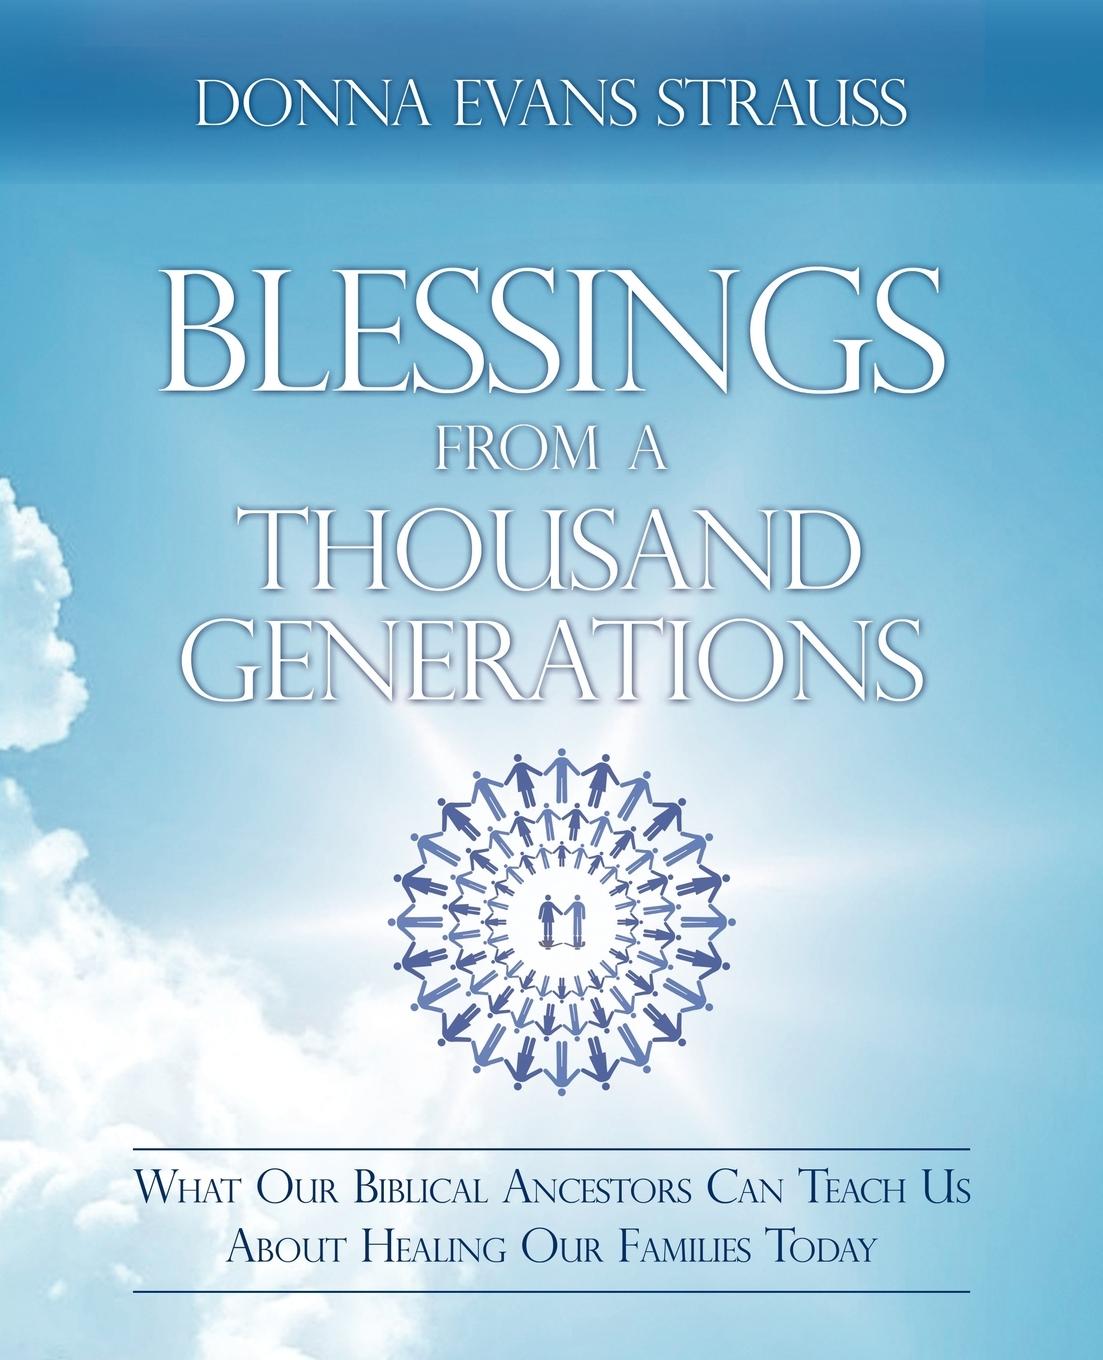 Blessings from a Thousand Generations - Evans Strauss, Donna